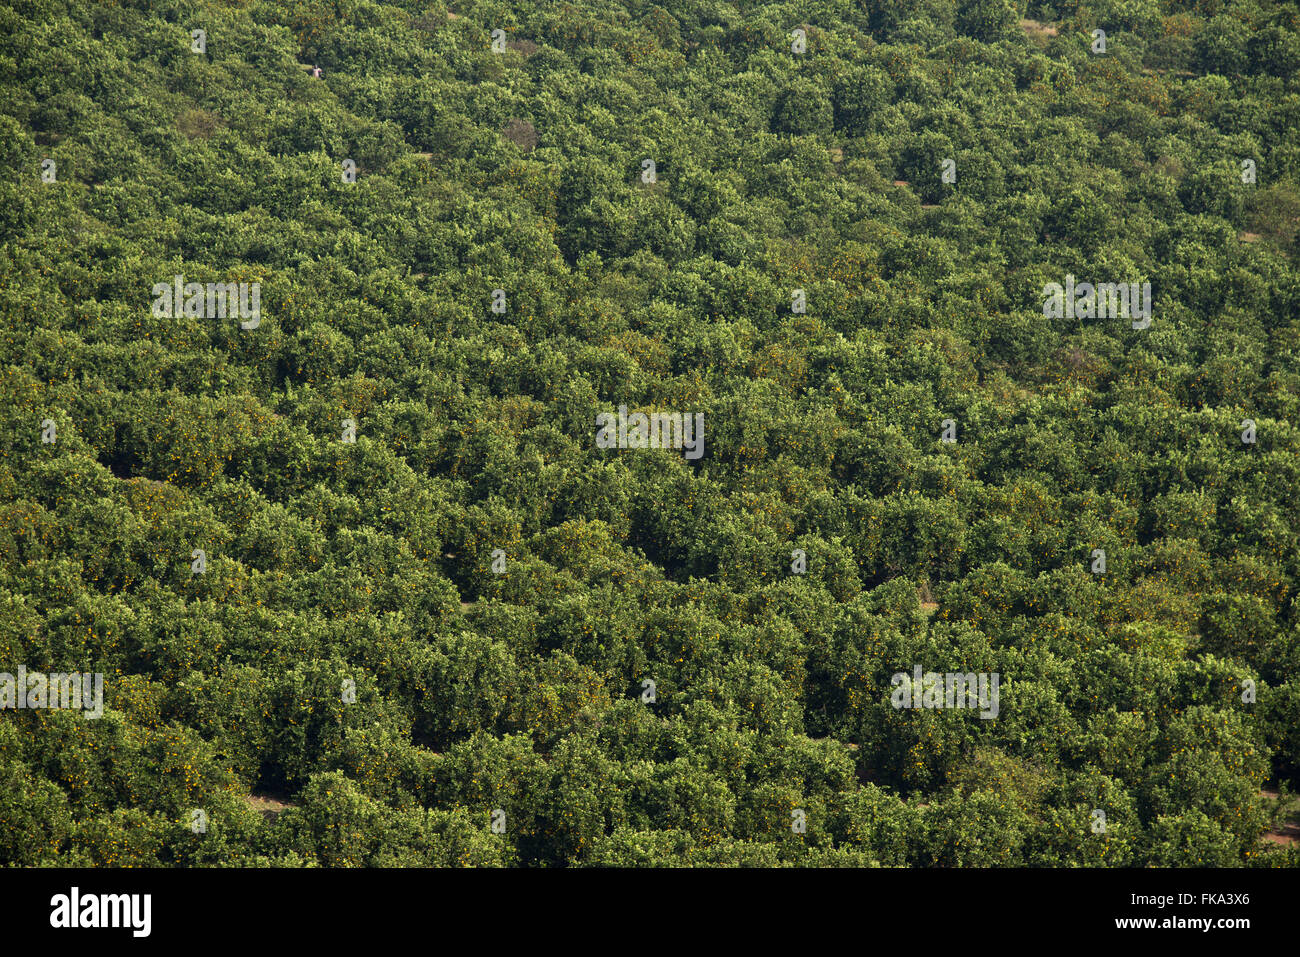 Aerial view of orange groves in the countryside Stock Photo